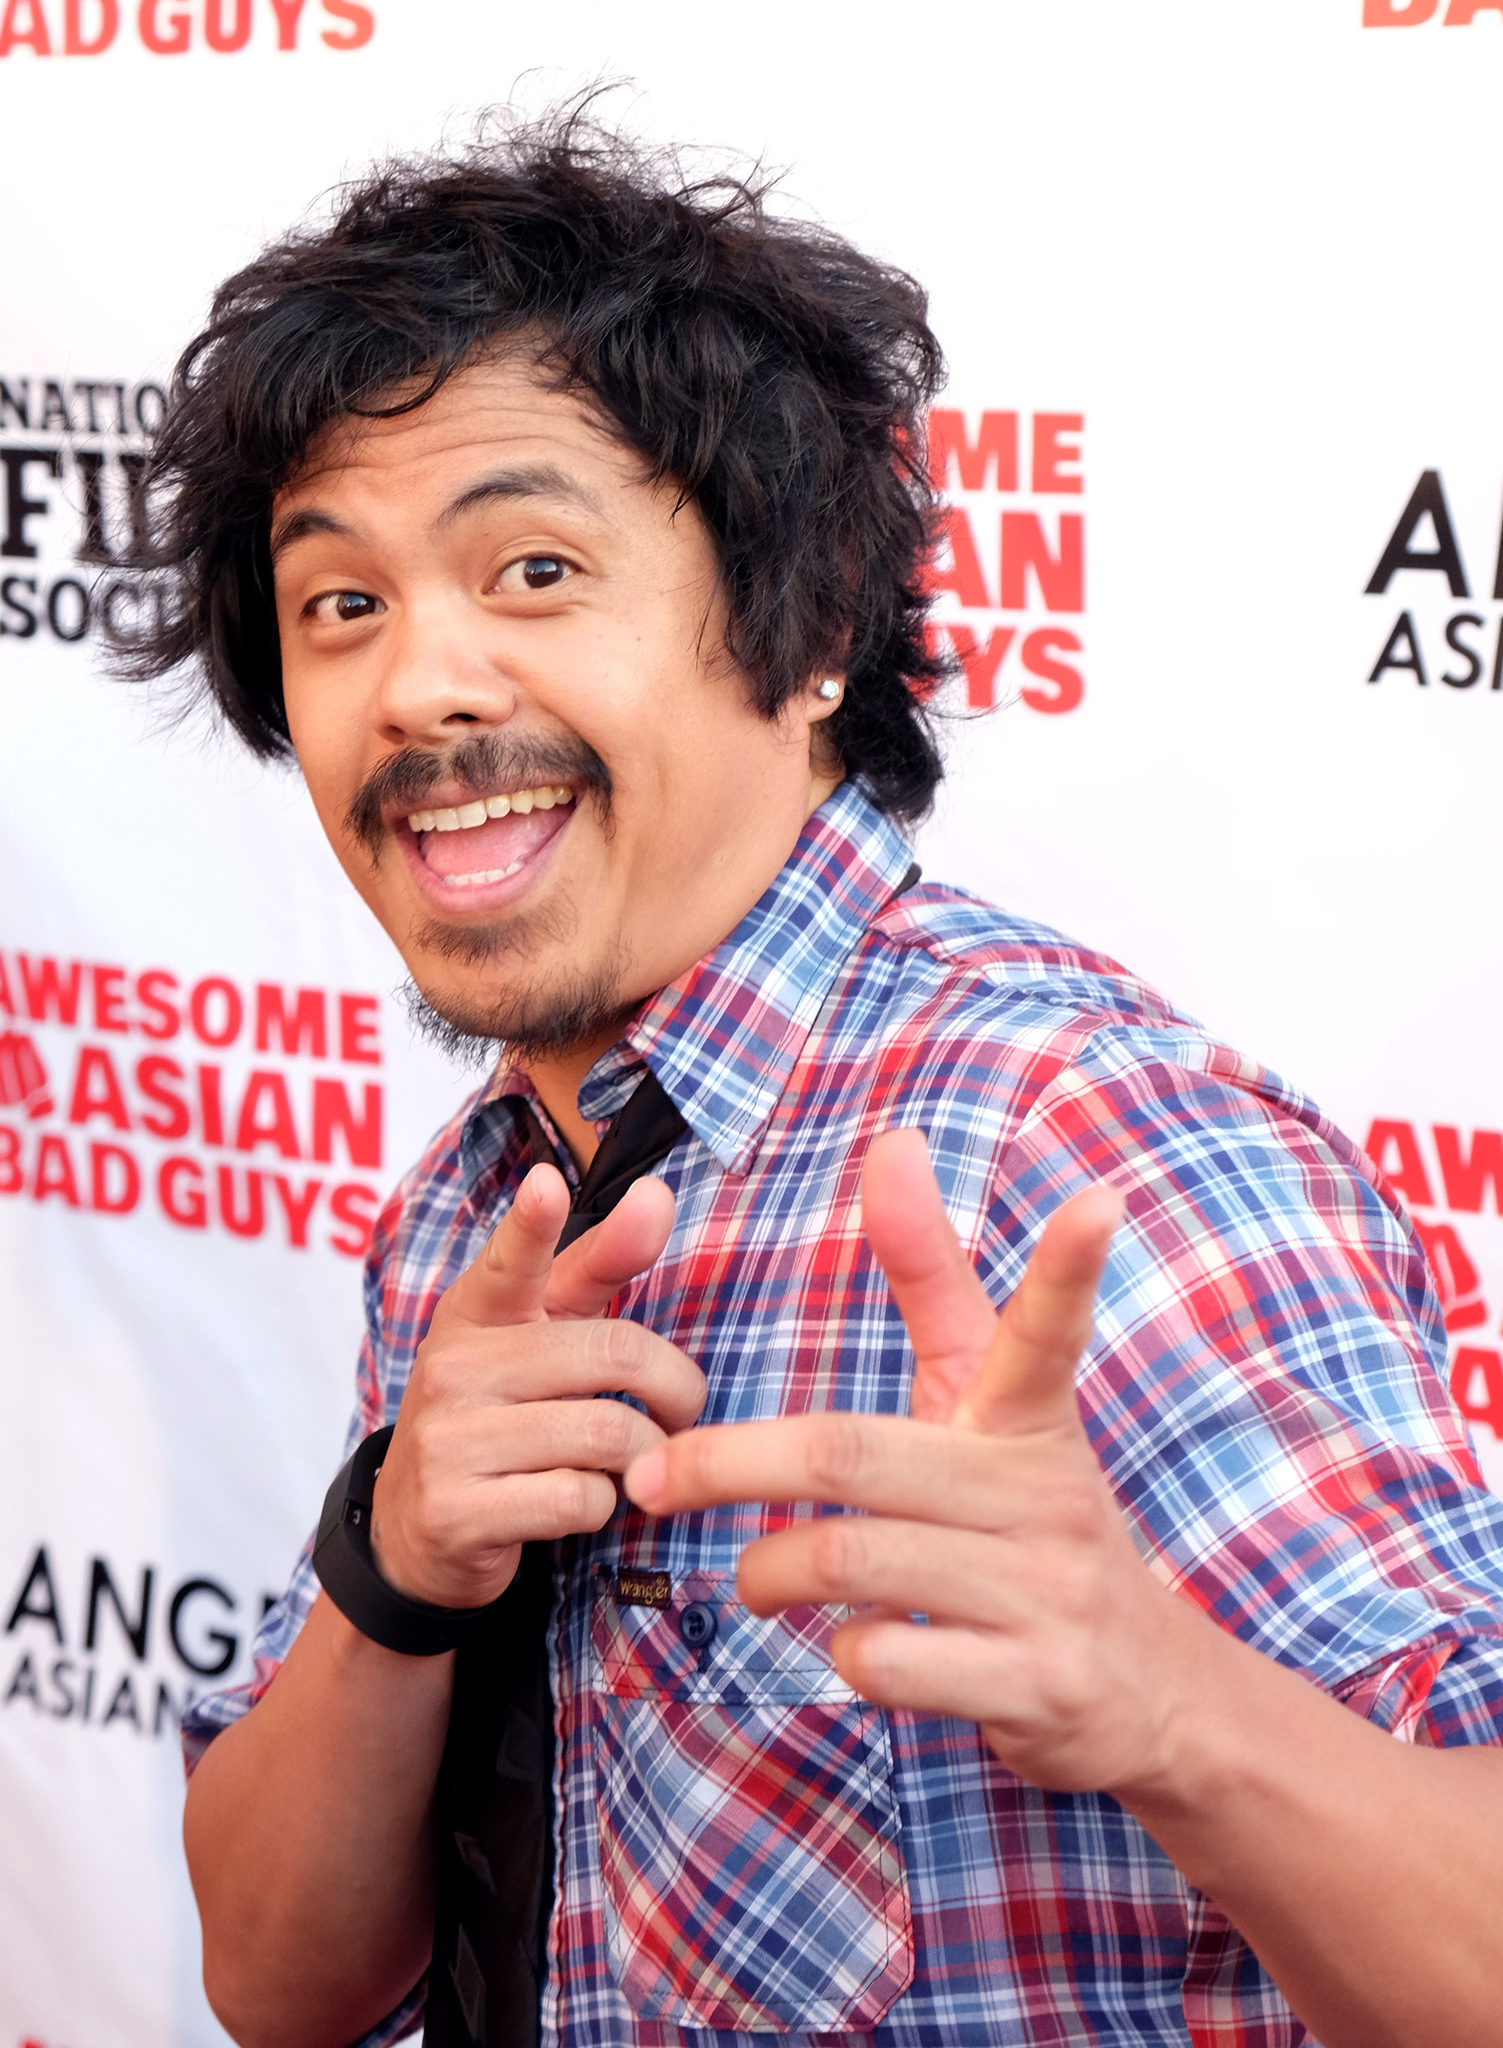 Patrick Epino at event of Awesome Asian Bad Guys (2014)